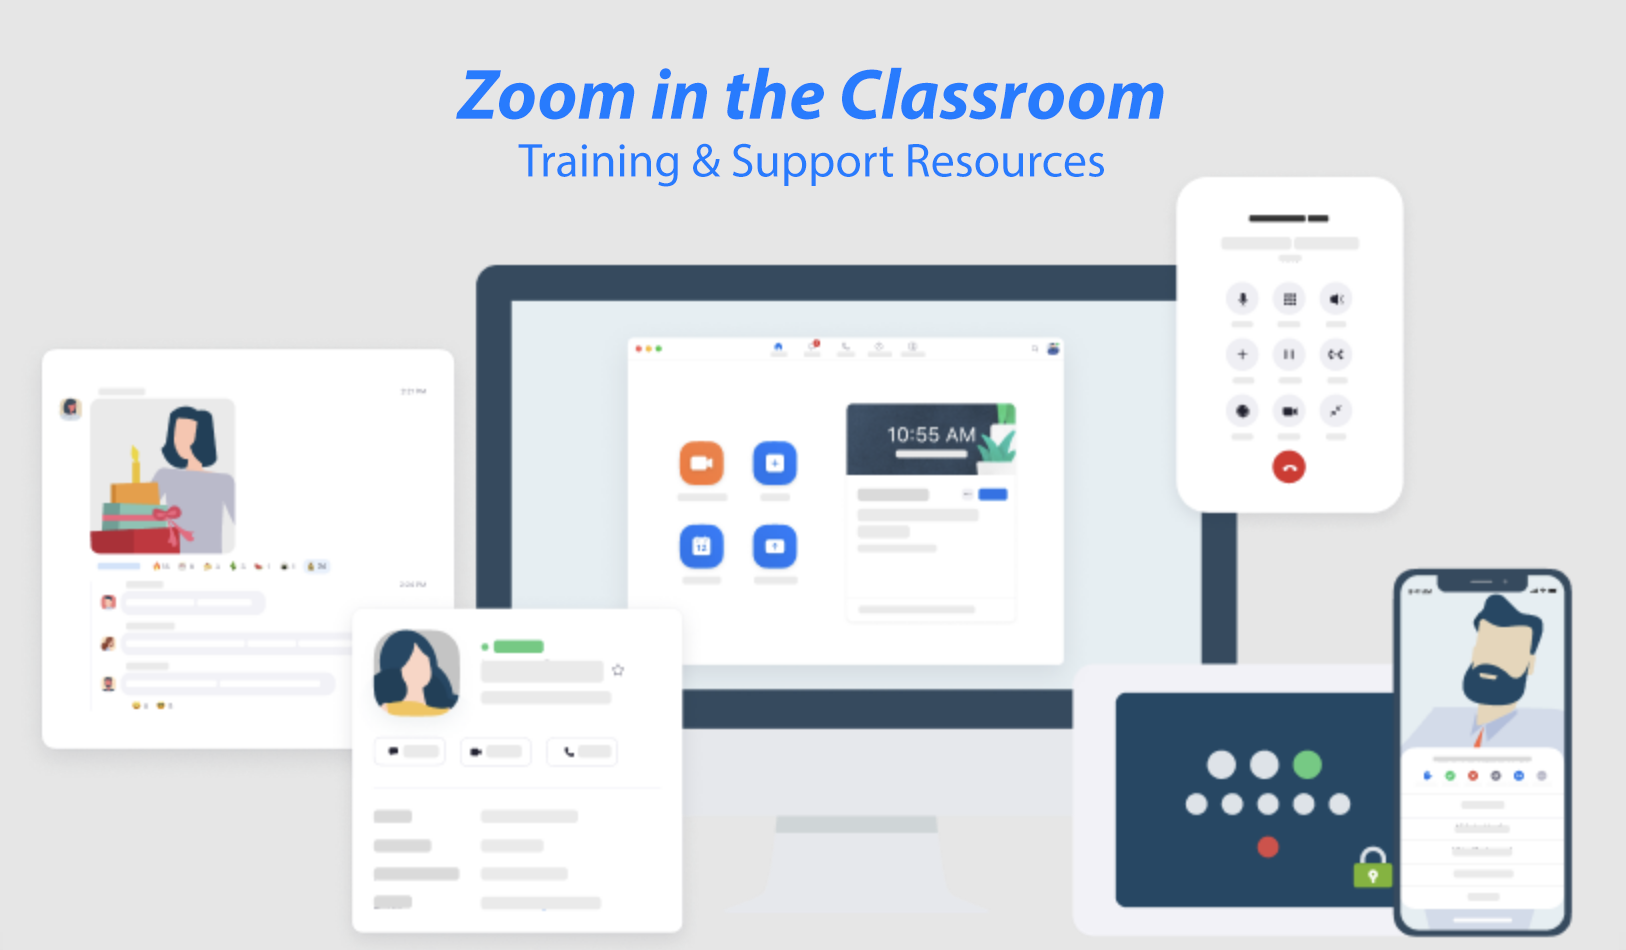 Zoom in the Classroom